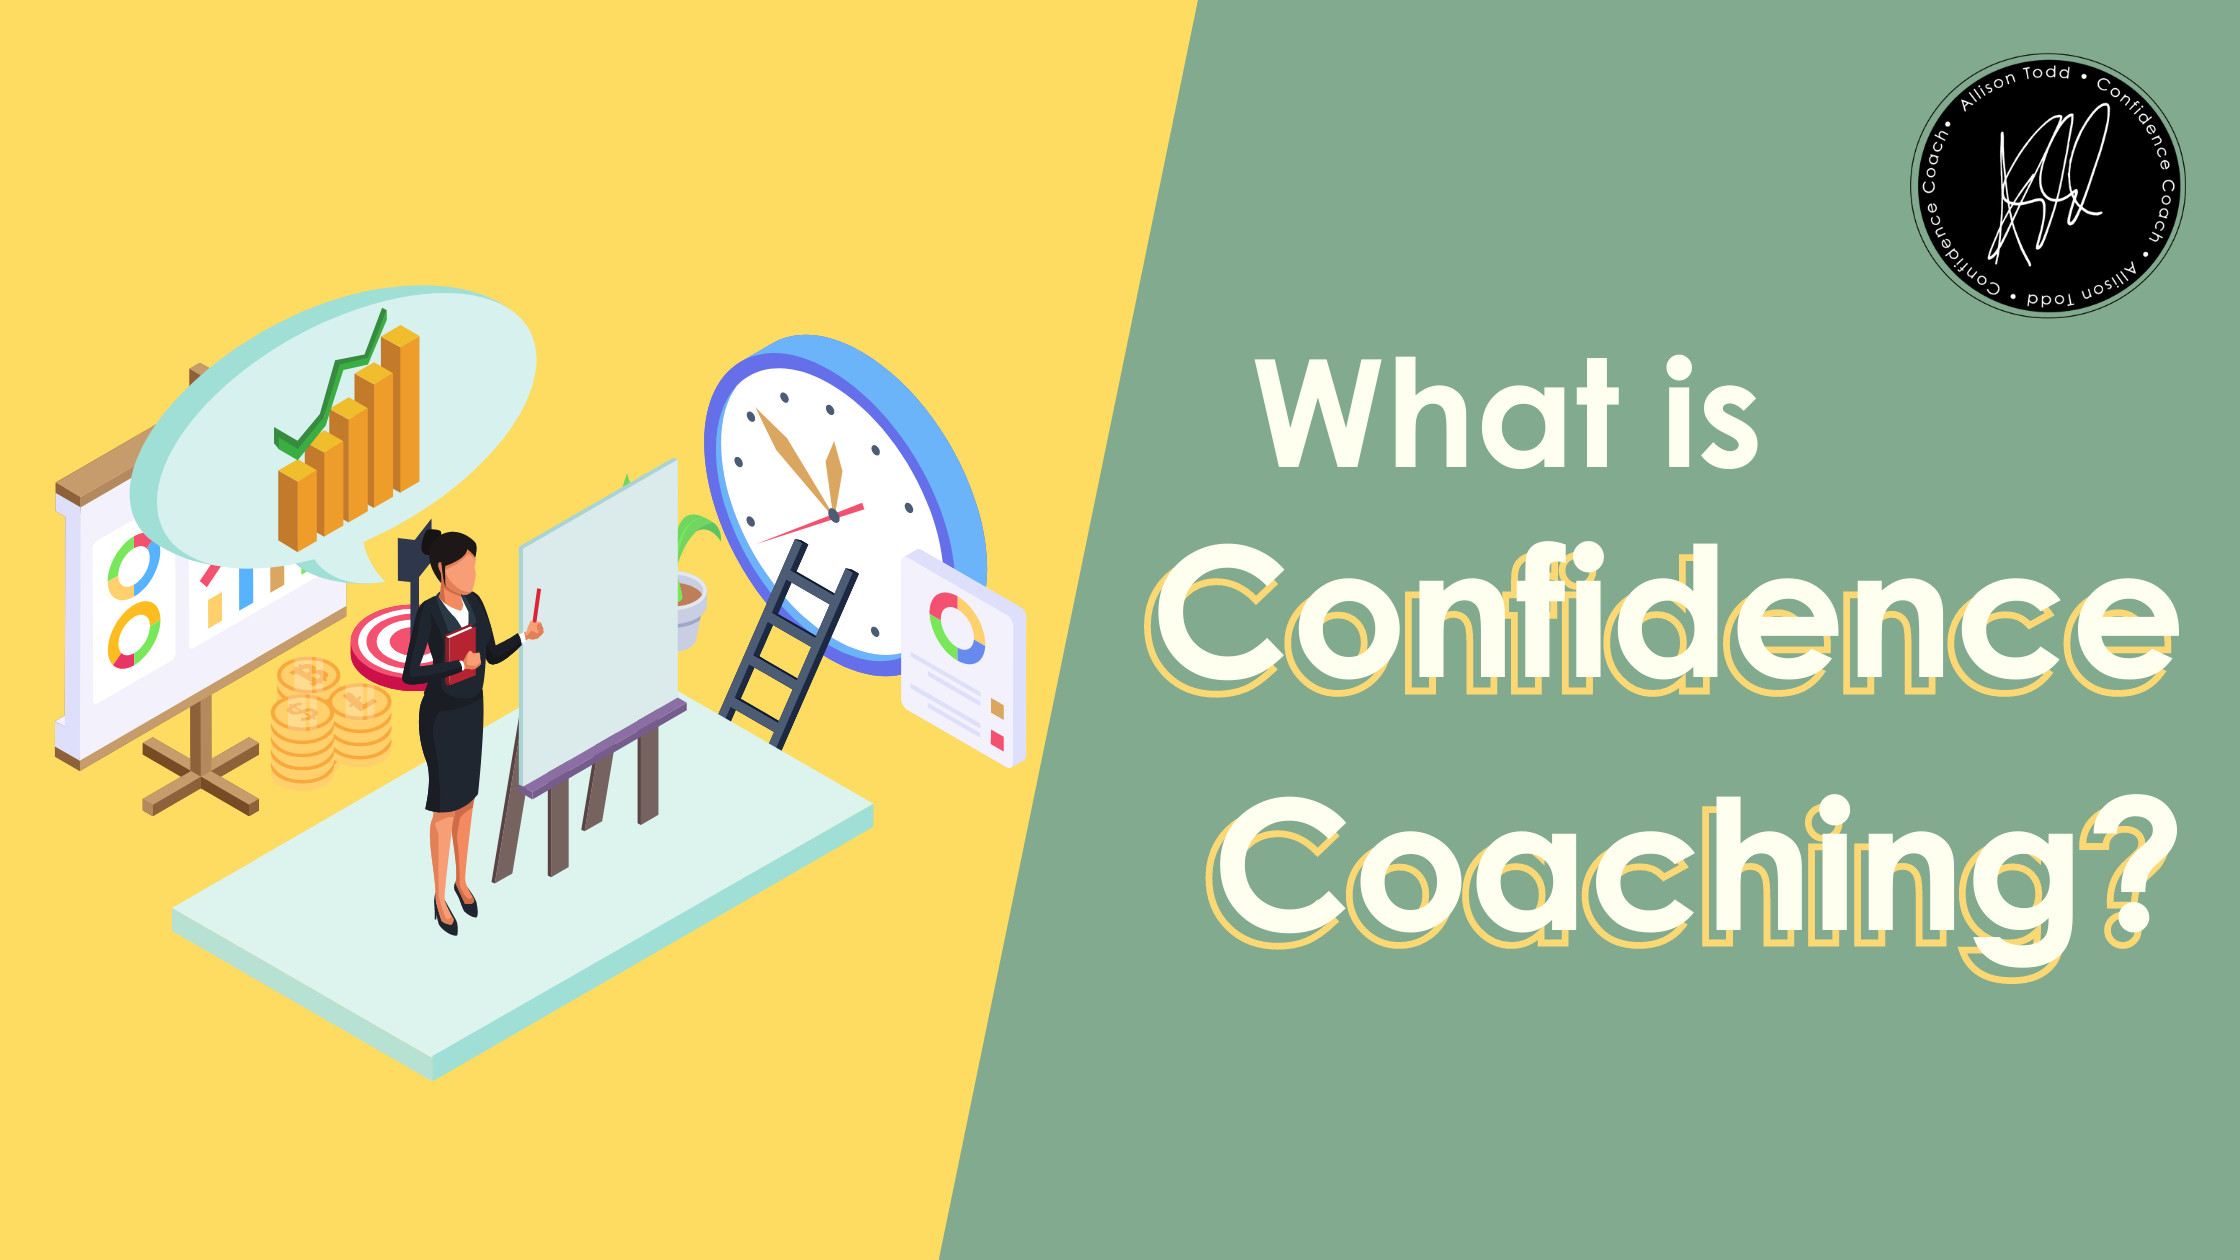 What is Confidence Coaching?